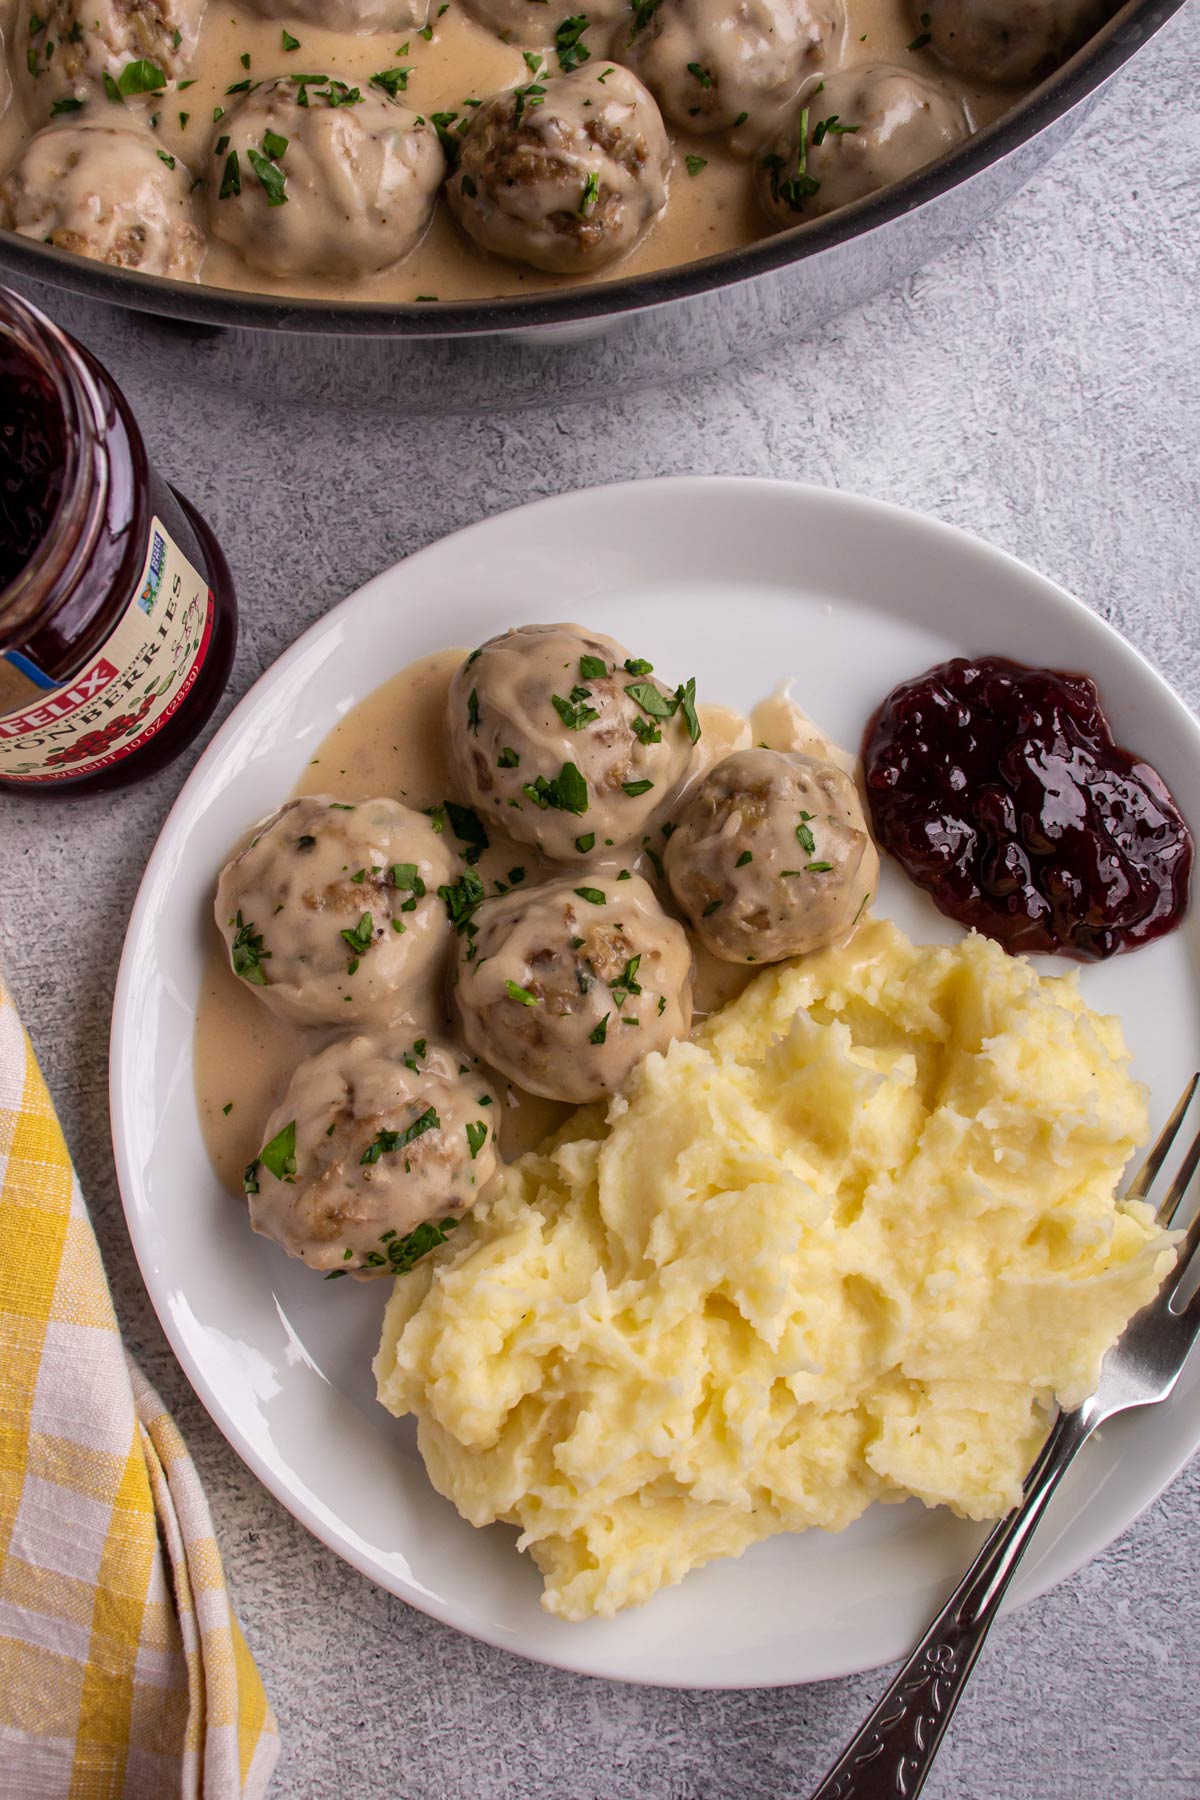 Five Swedish meatballs in gravy served with mashed potatoes and lingonberry preserves on a white plate.